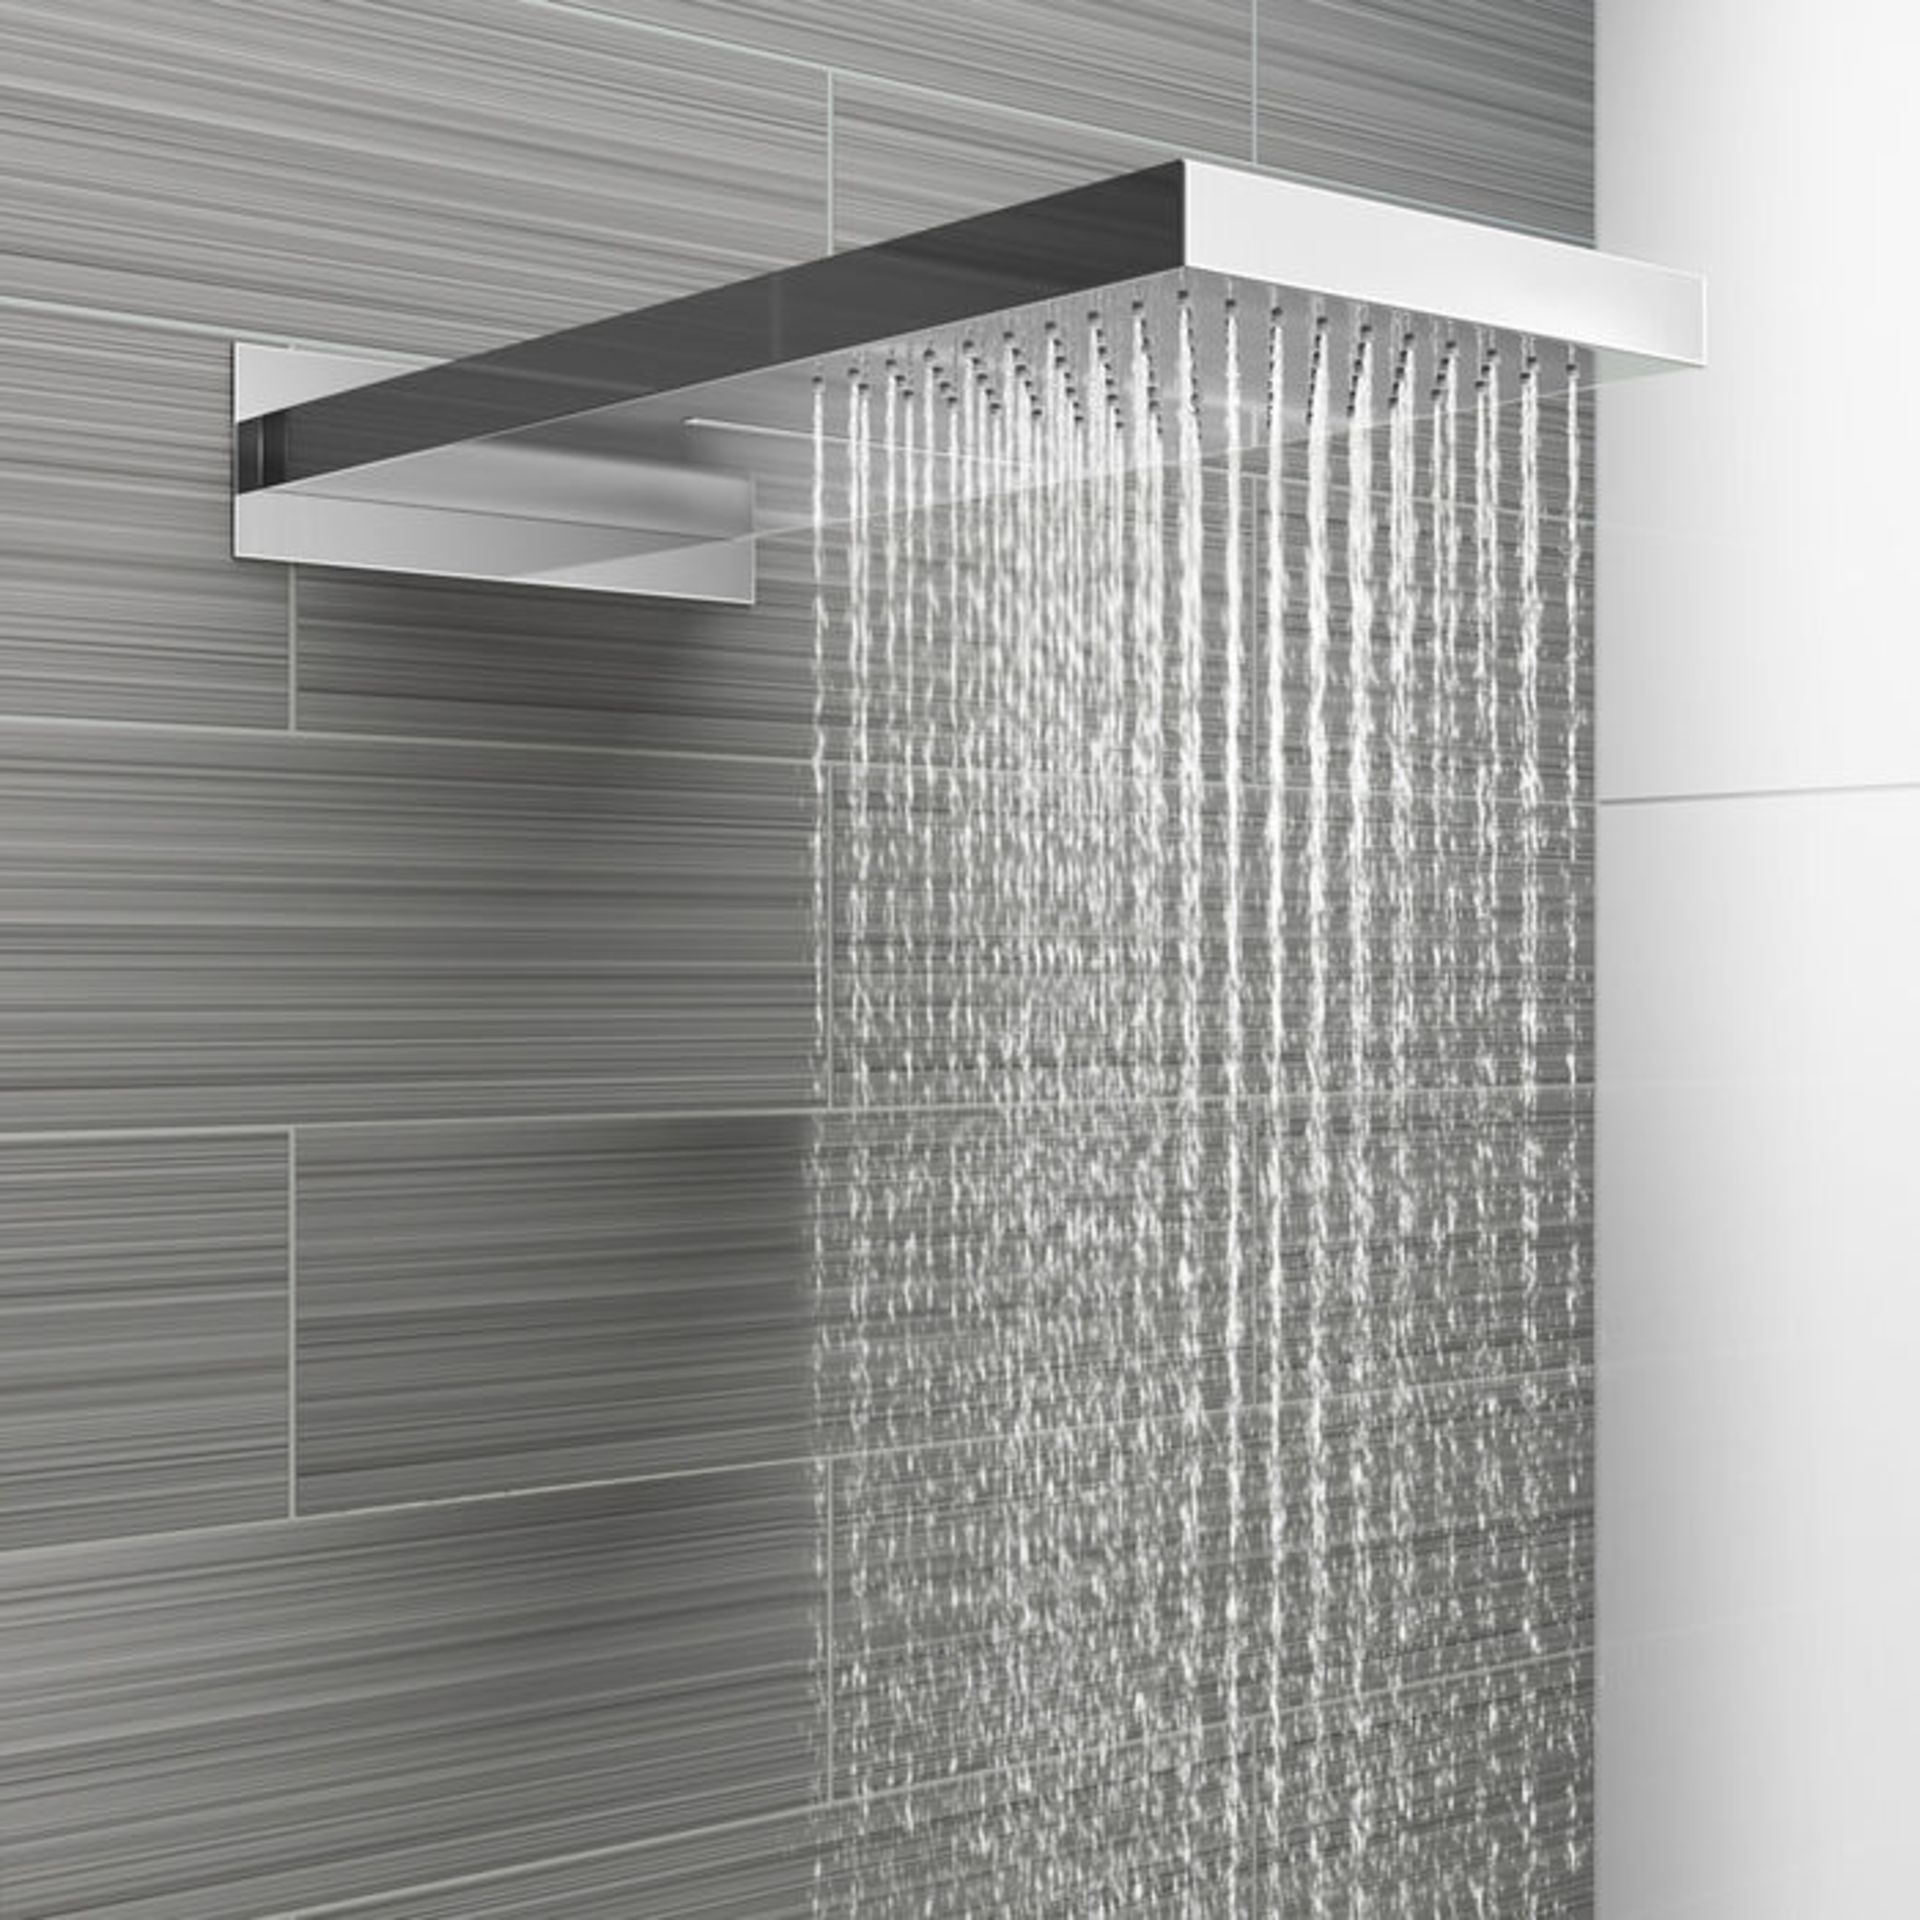 (DK51) Stainless Steel 230x500mm Waterfall Shower Head. RRP £374.99. Dual function waterfall and - Image 3 of 7